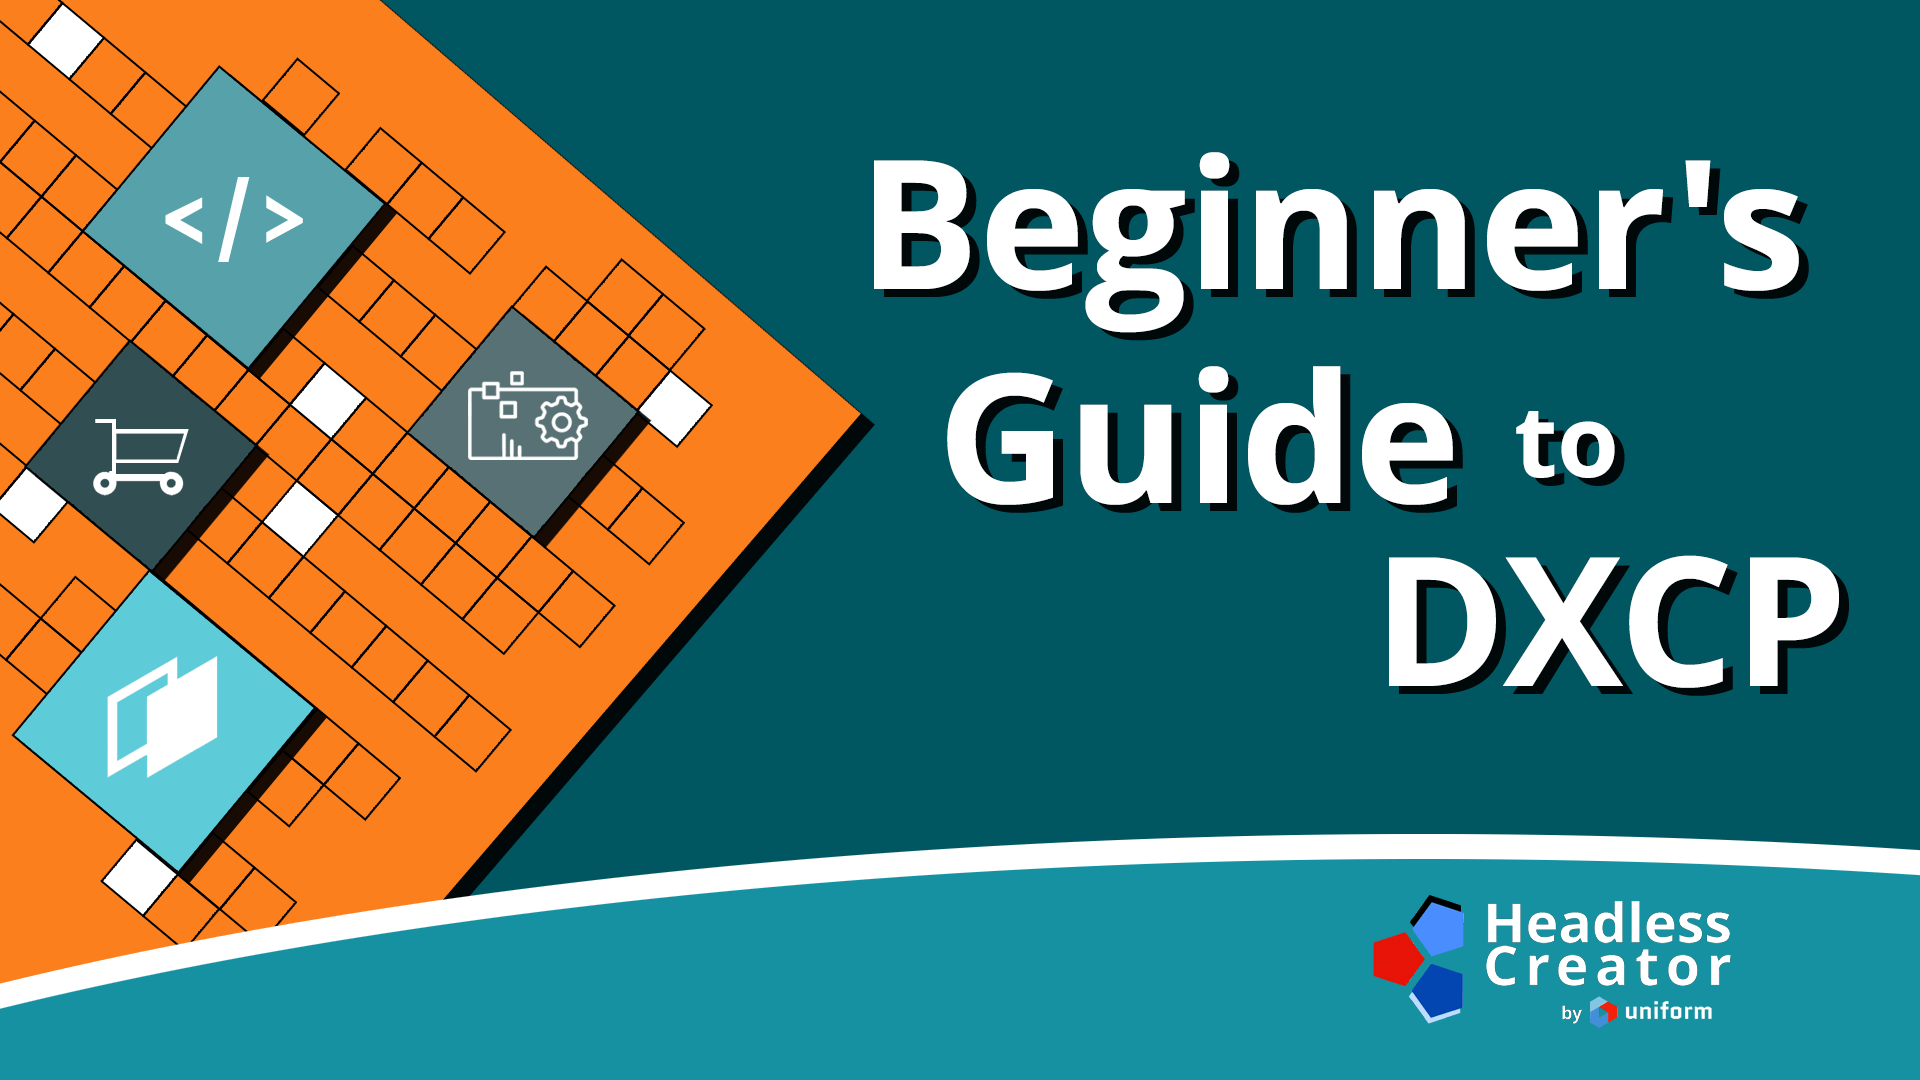 Beginner's Guide to DXCP